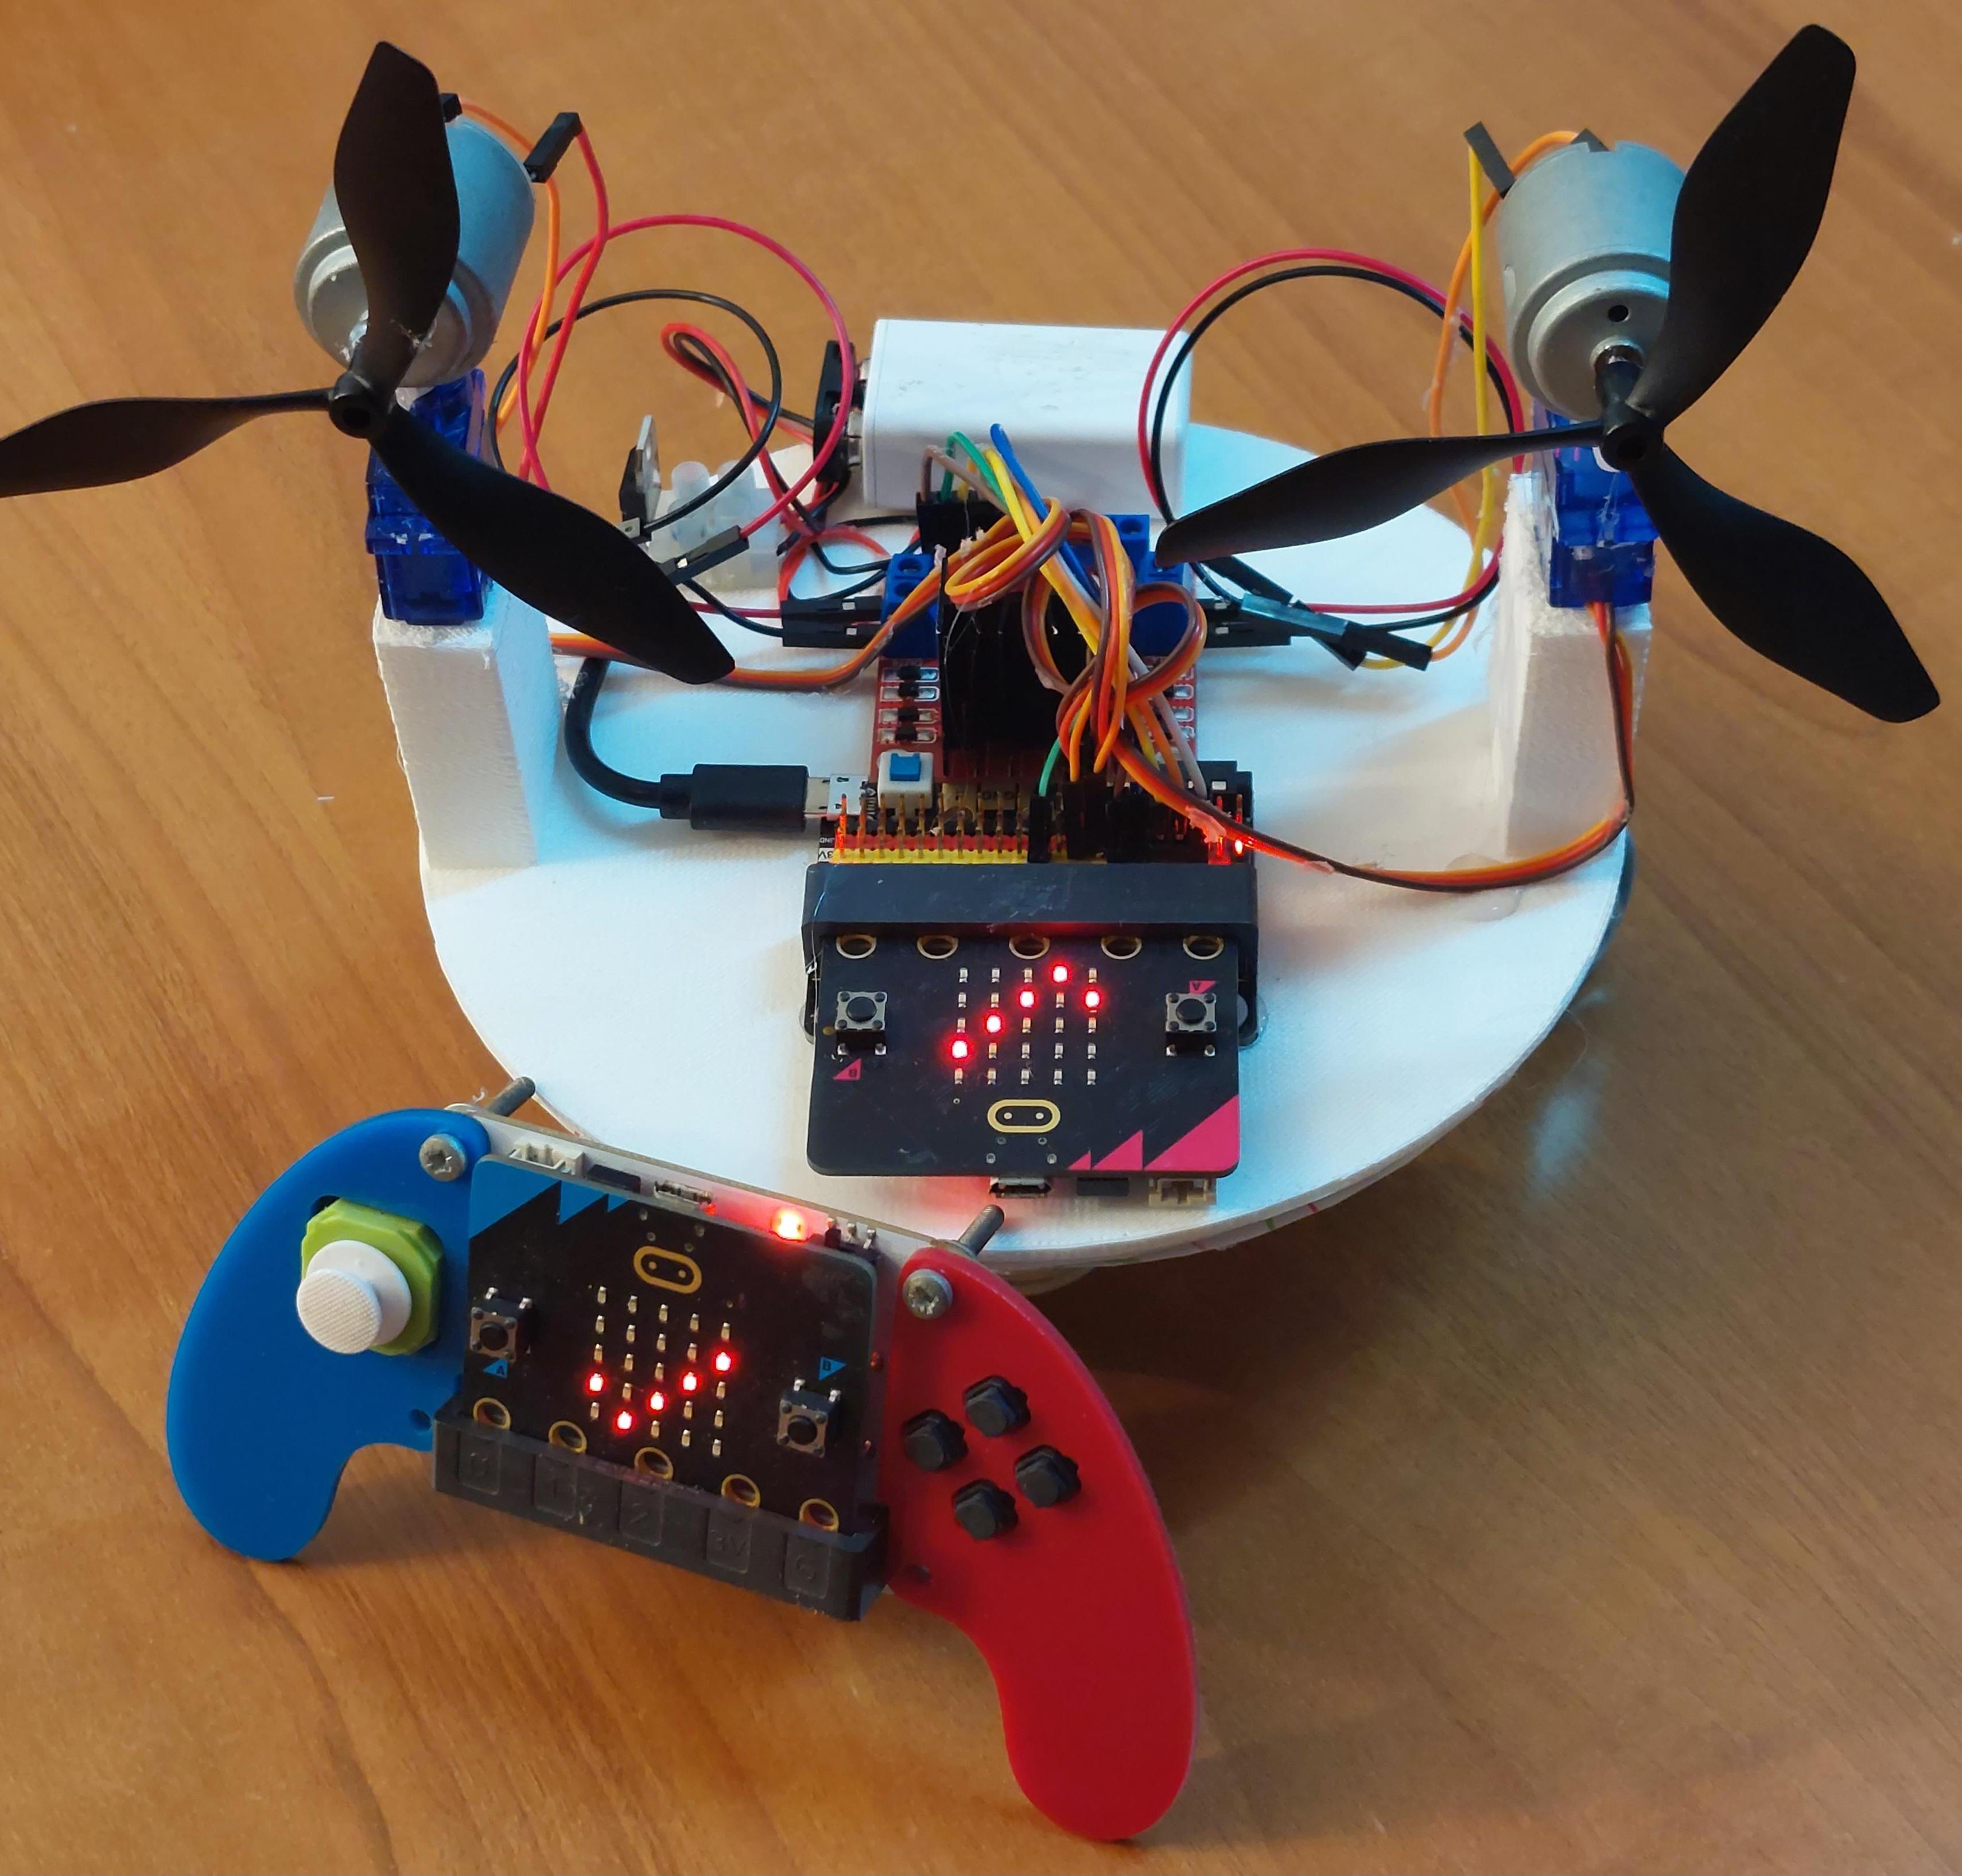 Propeller-Driven RC Vehicle